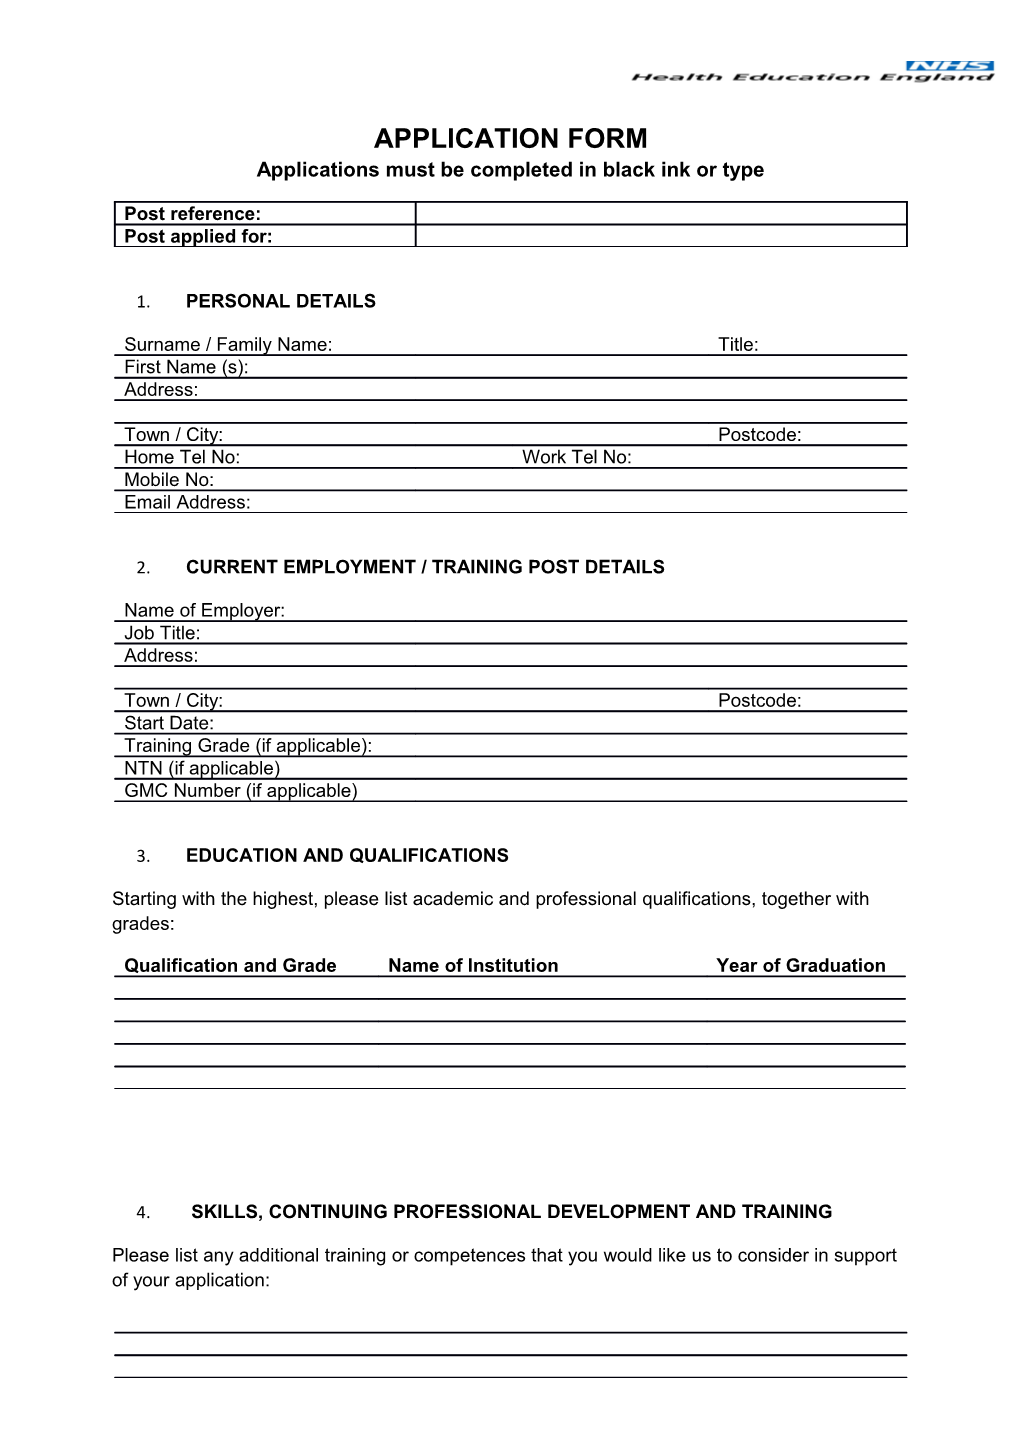 APPLICATION FORM Applications Must Be Completed in Black Ink Or Type